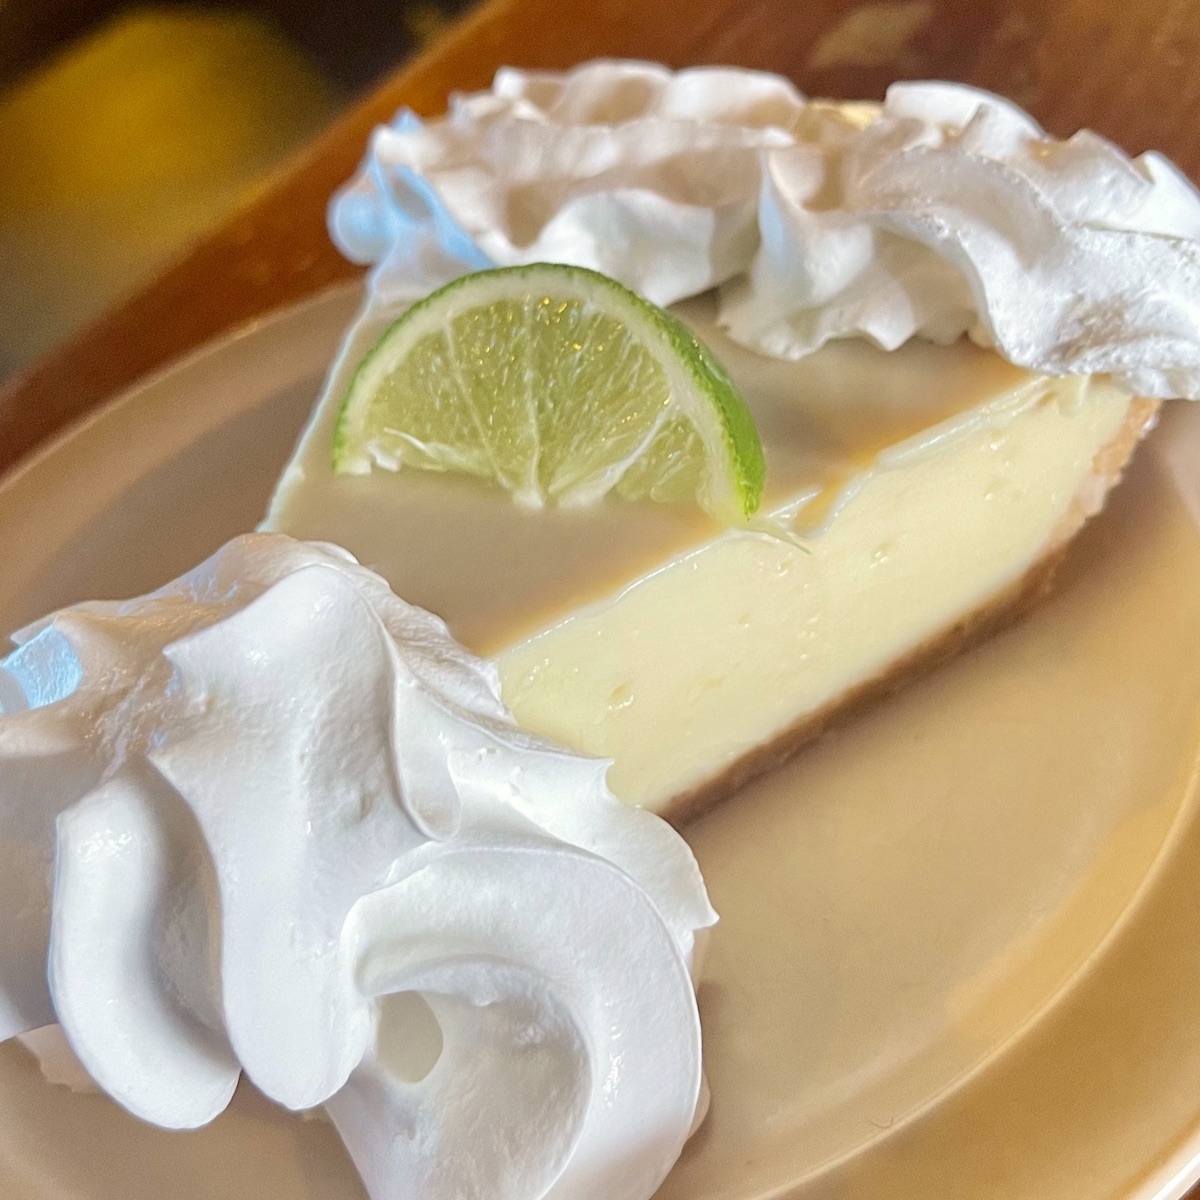 Key Lime Pie from Shorty's BBQ in Miami, Florida